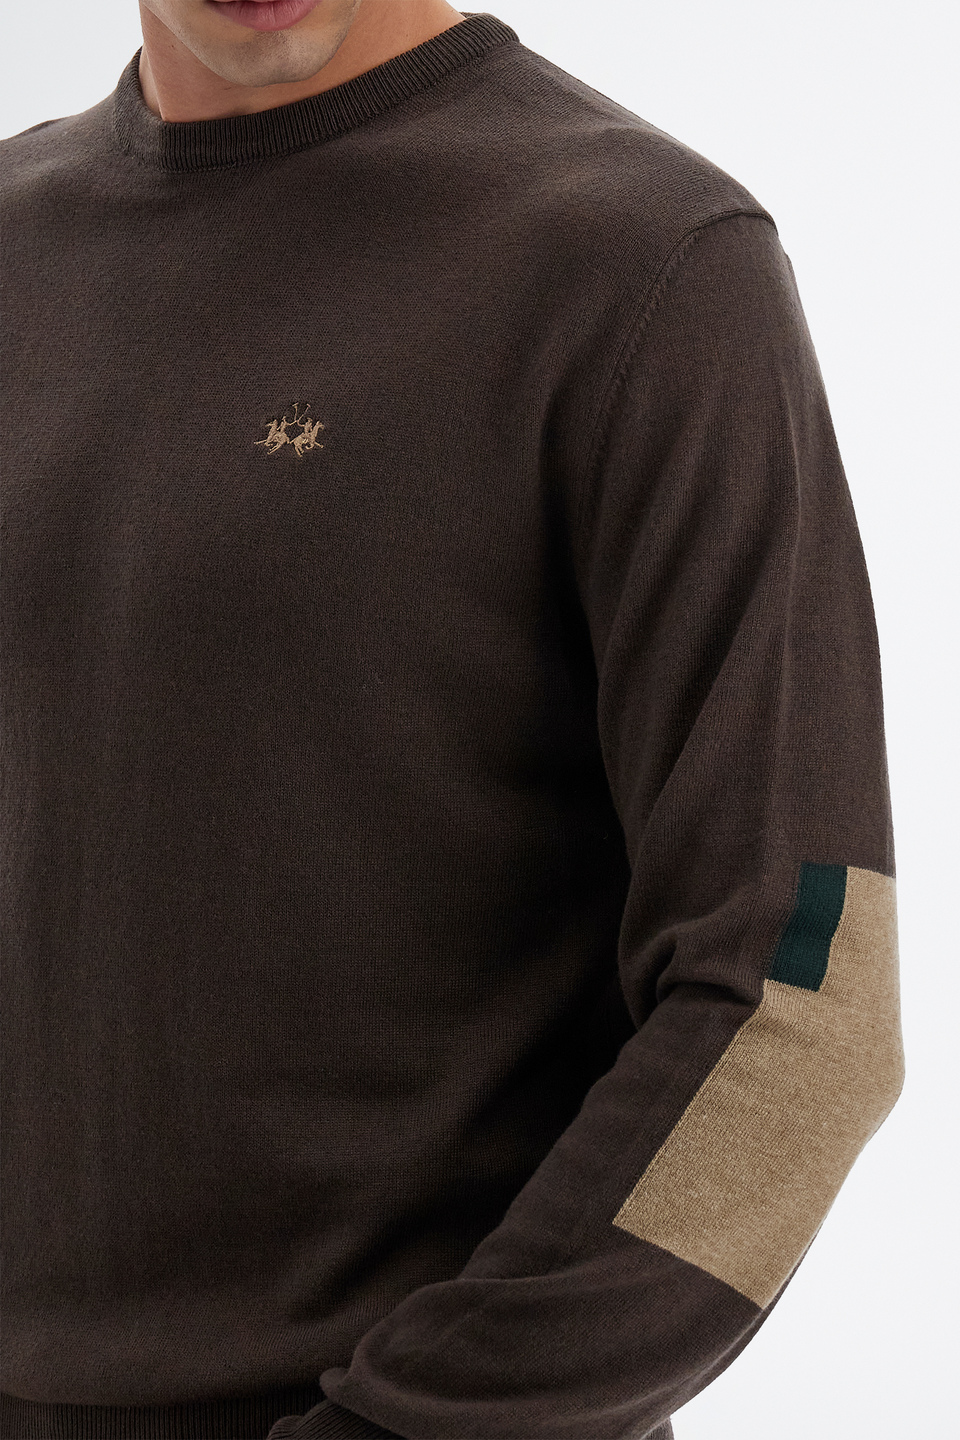 Men’s knit sweater with long sleeves in cotton blend wool regular fit crew neck | La Martina - Official Online Shop